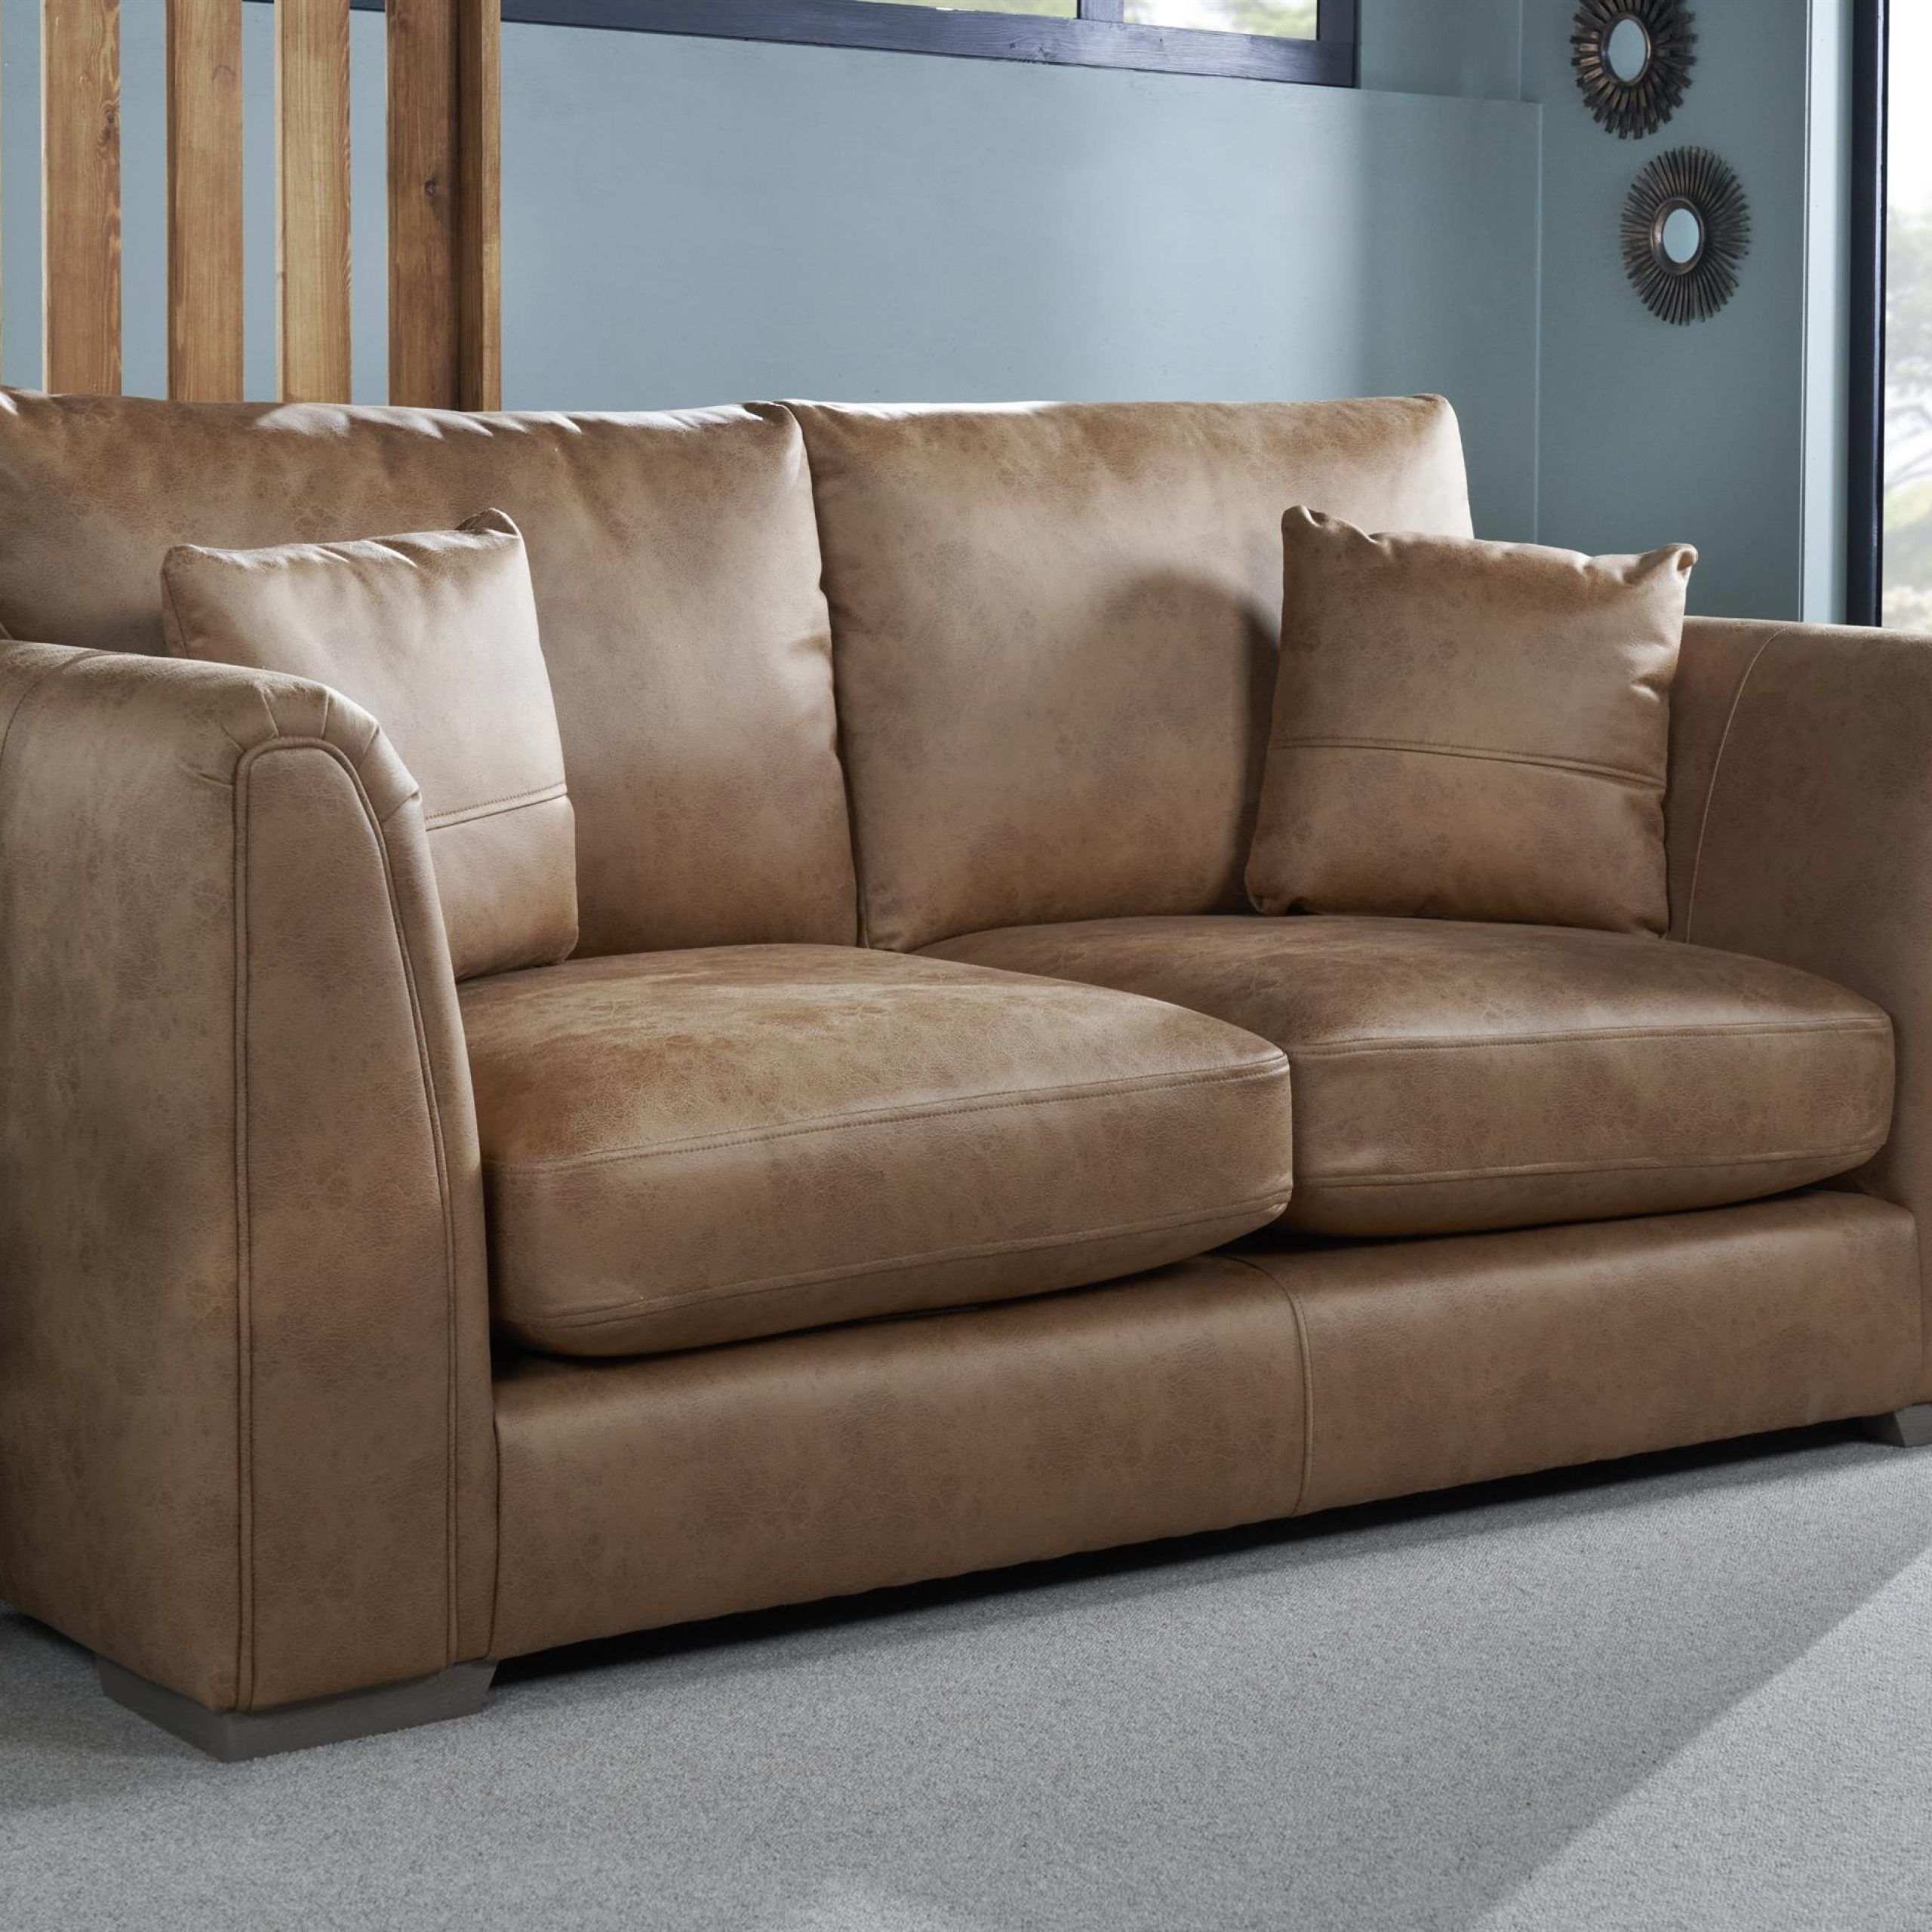 Endurance Xavier Faux Leather 2 Seater Sofa Inside Faux Leather Sofas (View 4 of 15)